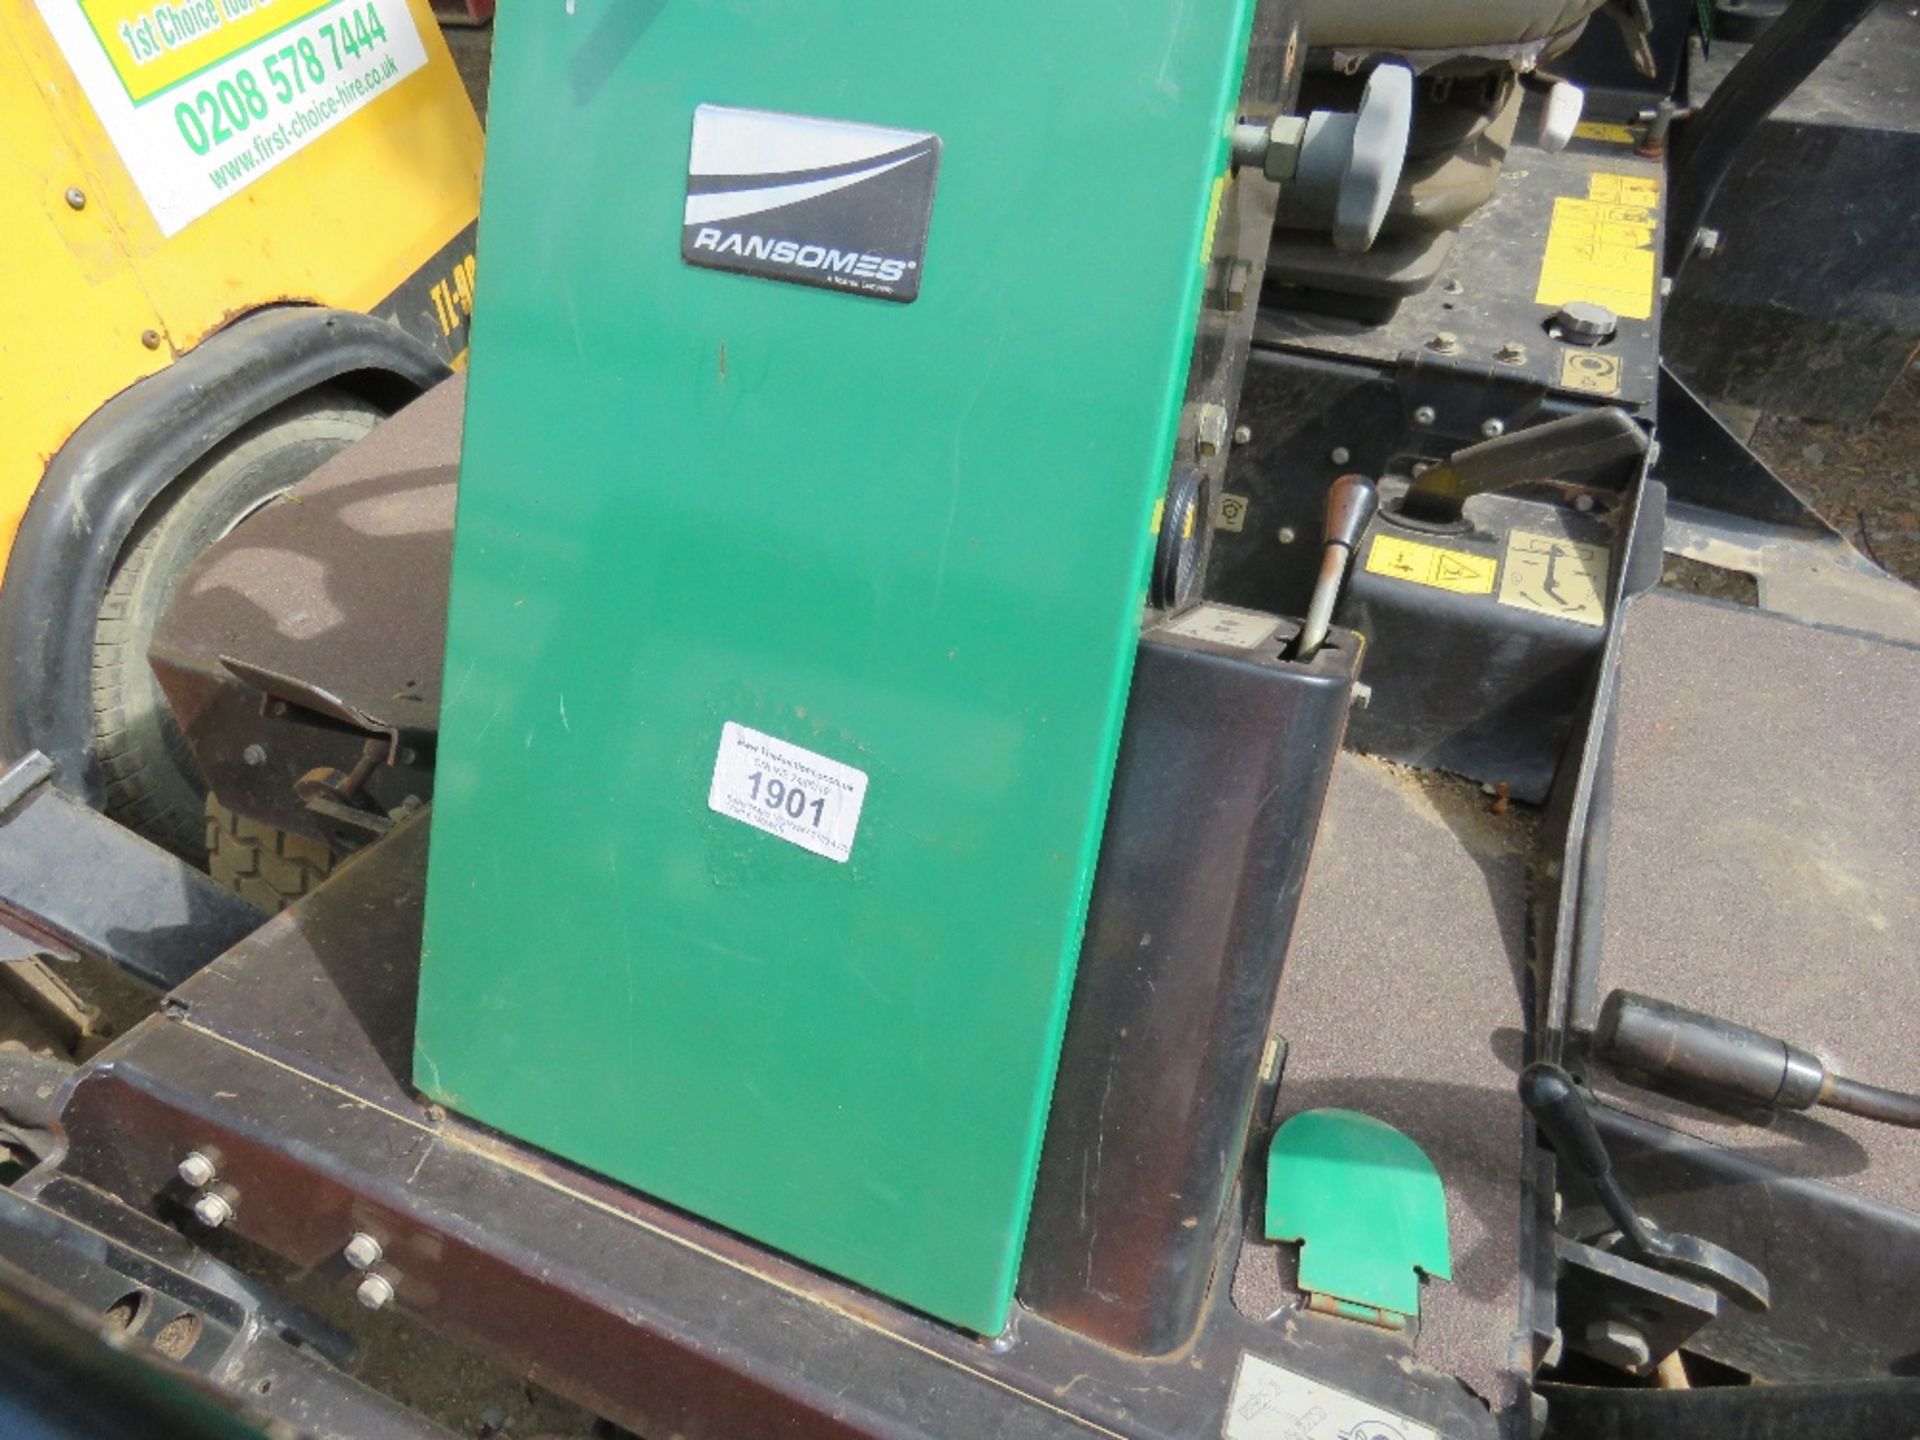 RANSOMES HIGHWAY 2130 4WD TRIPLE MOWER REG:SF08 PVU LOG BOOK TO APPLY FOR WHEN TESTED WAS SEEN TO - Image 2 of 7